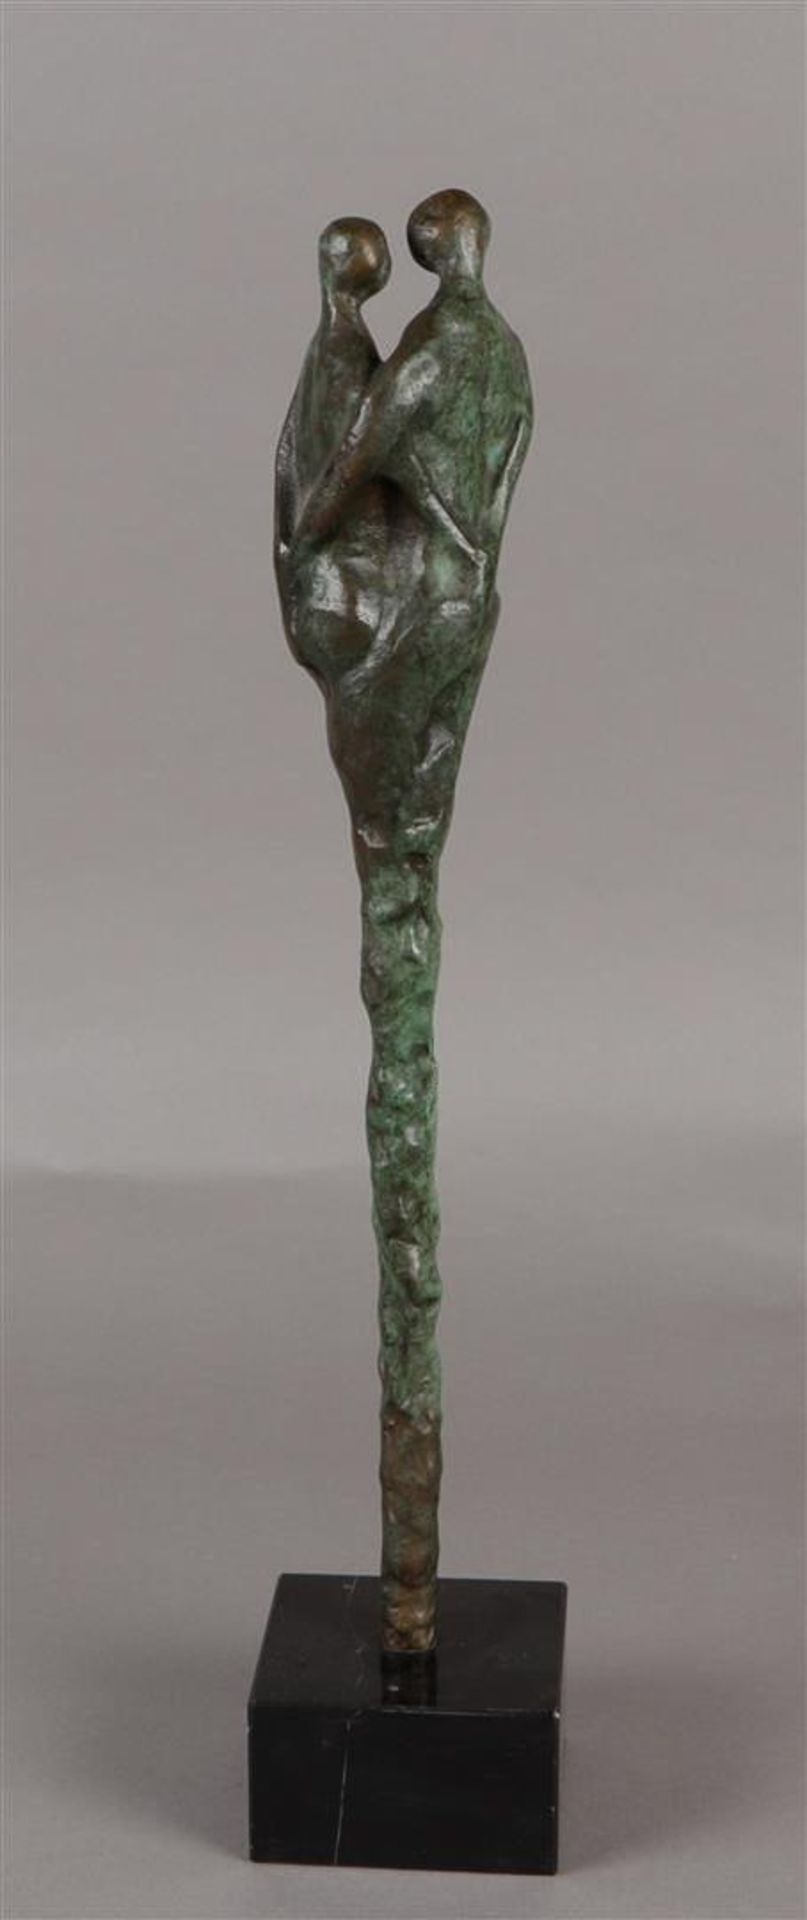 Elly de Clou (born Zoetermeer, 1953), Man and woman, bronze on honed marble base. - Image 2 of 2